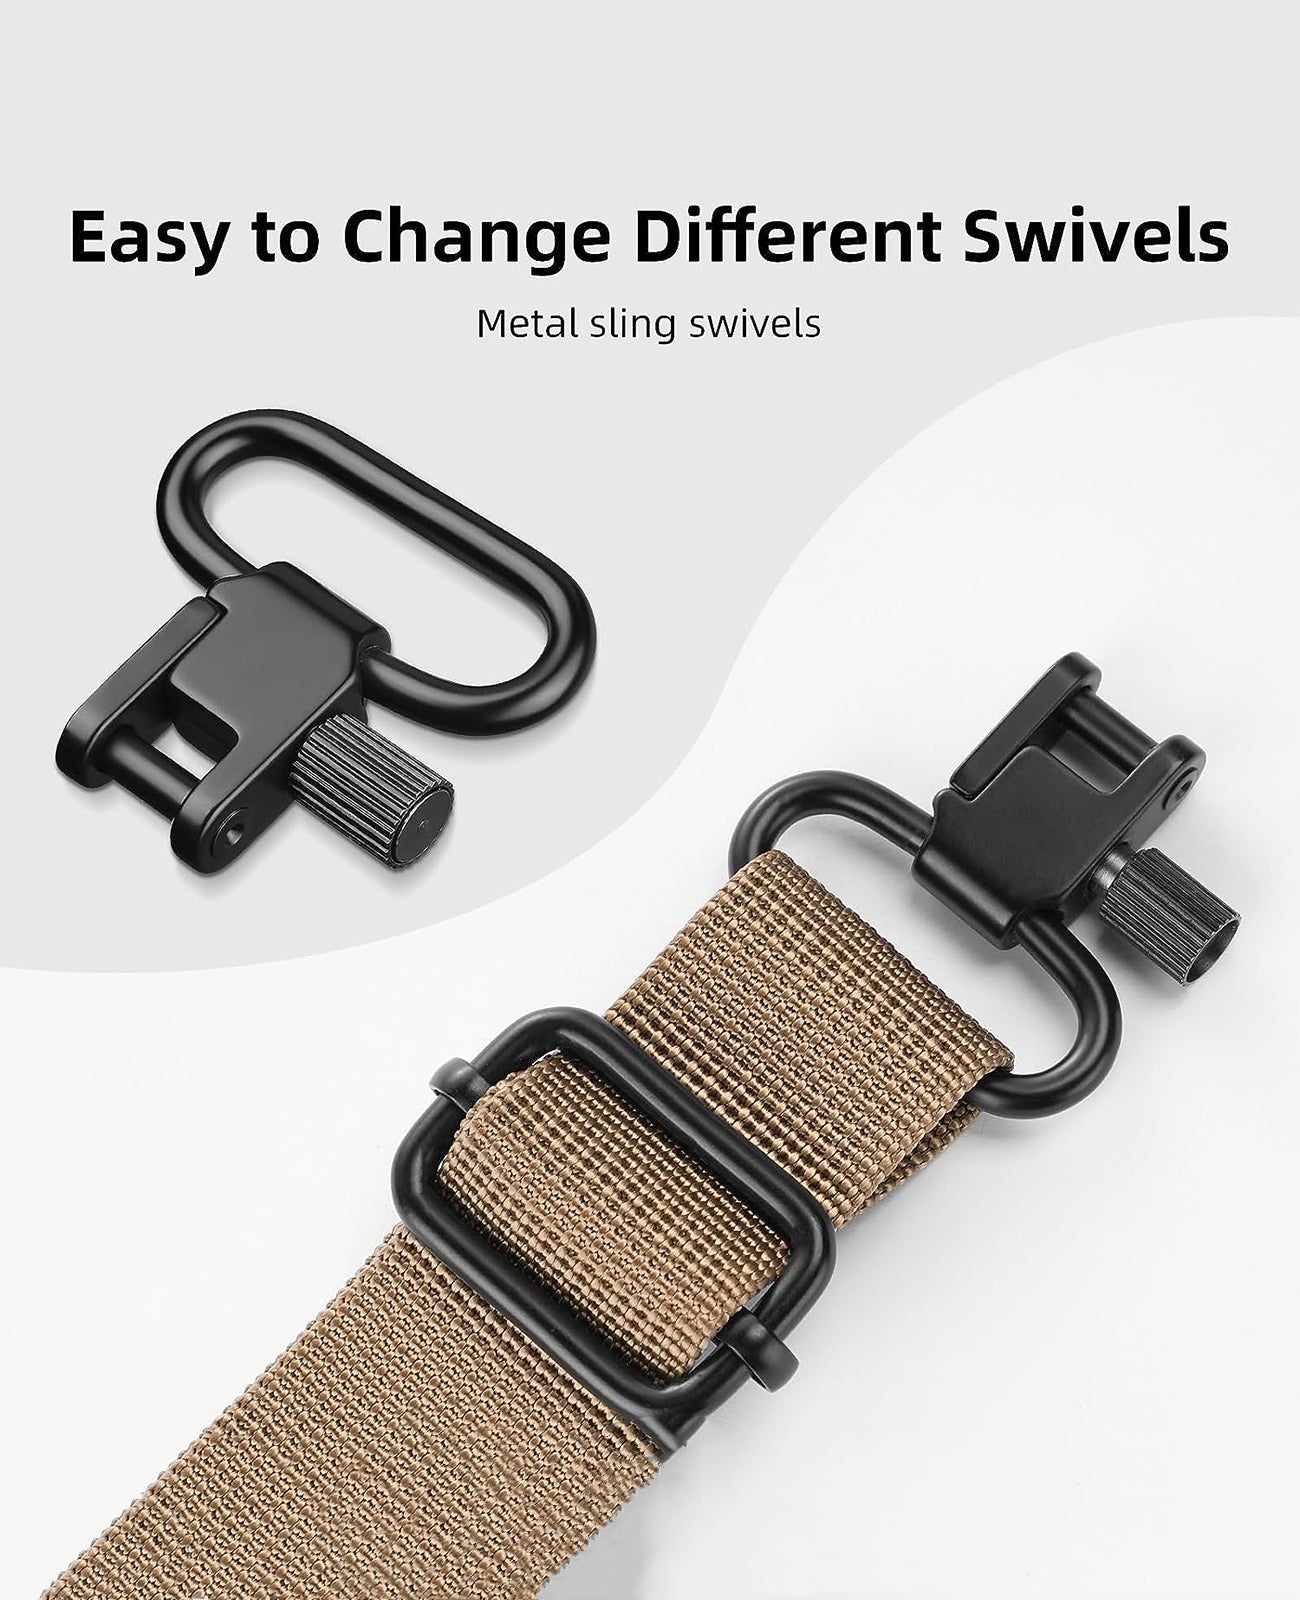 2 Point Sling with Detachable Sling Swivels